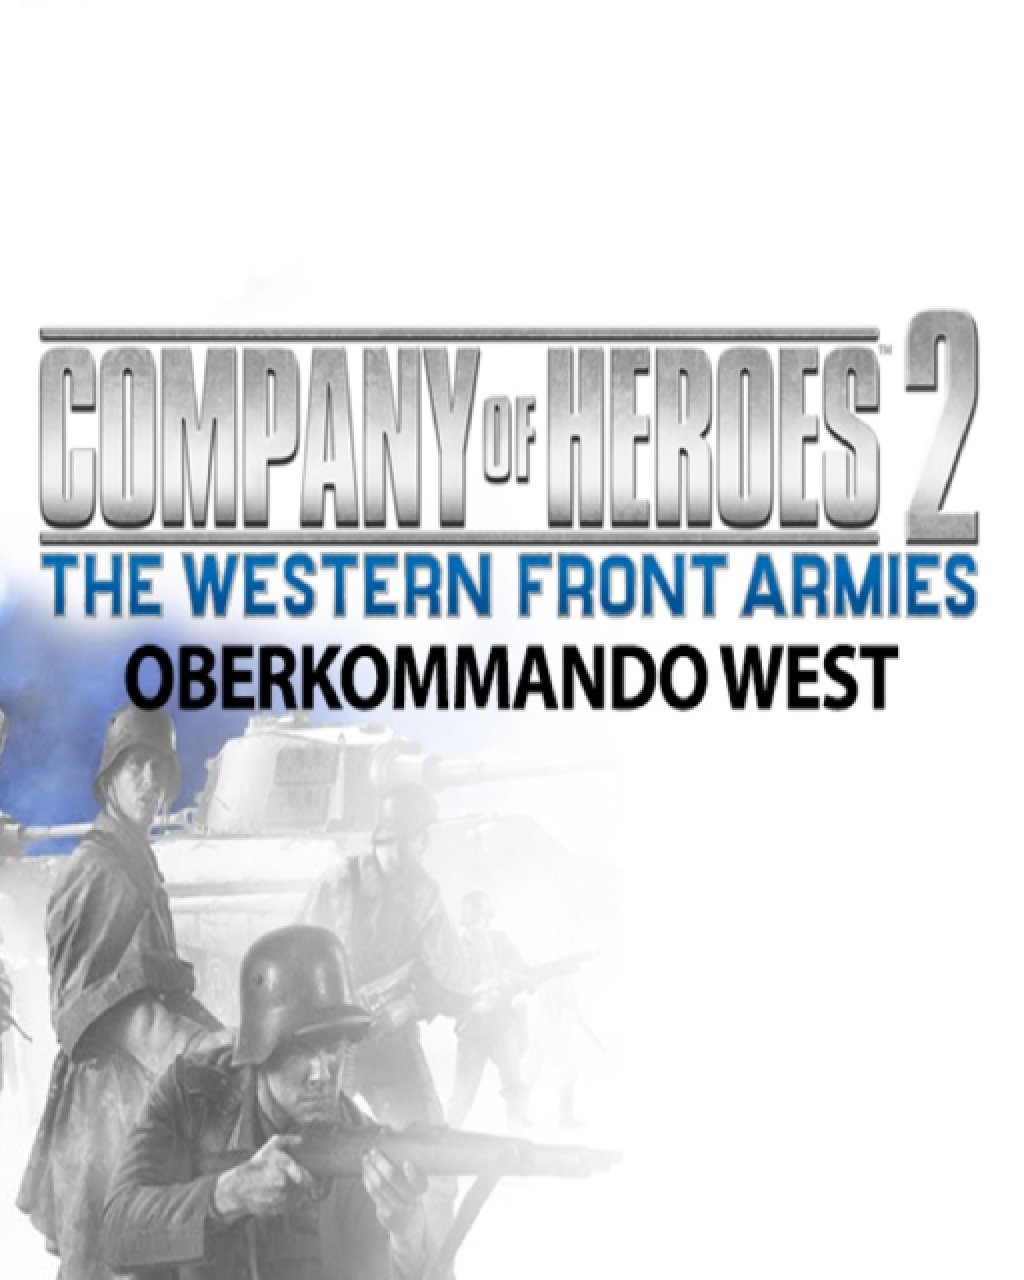 ESD Company of Heroes 2 The Western Front Armies O